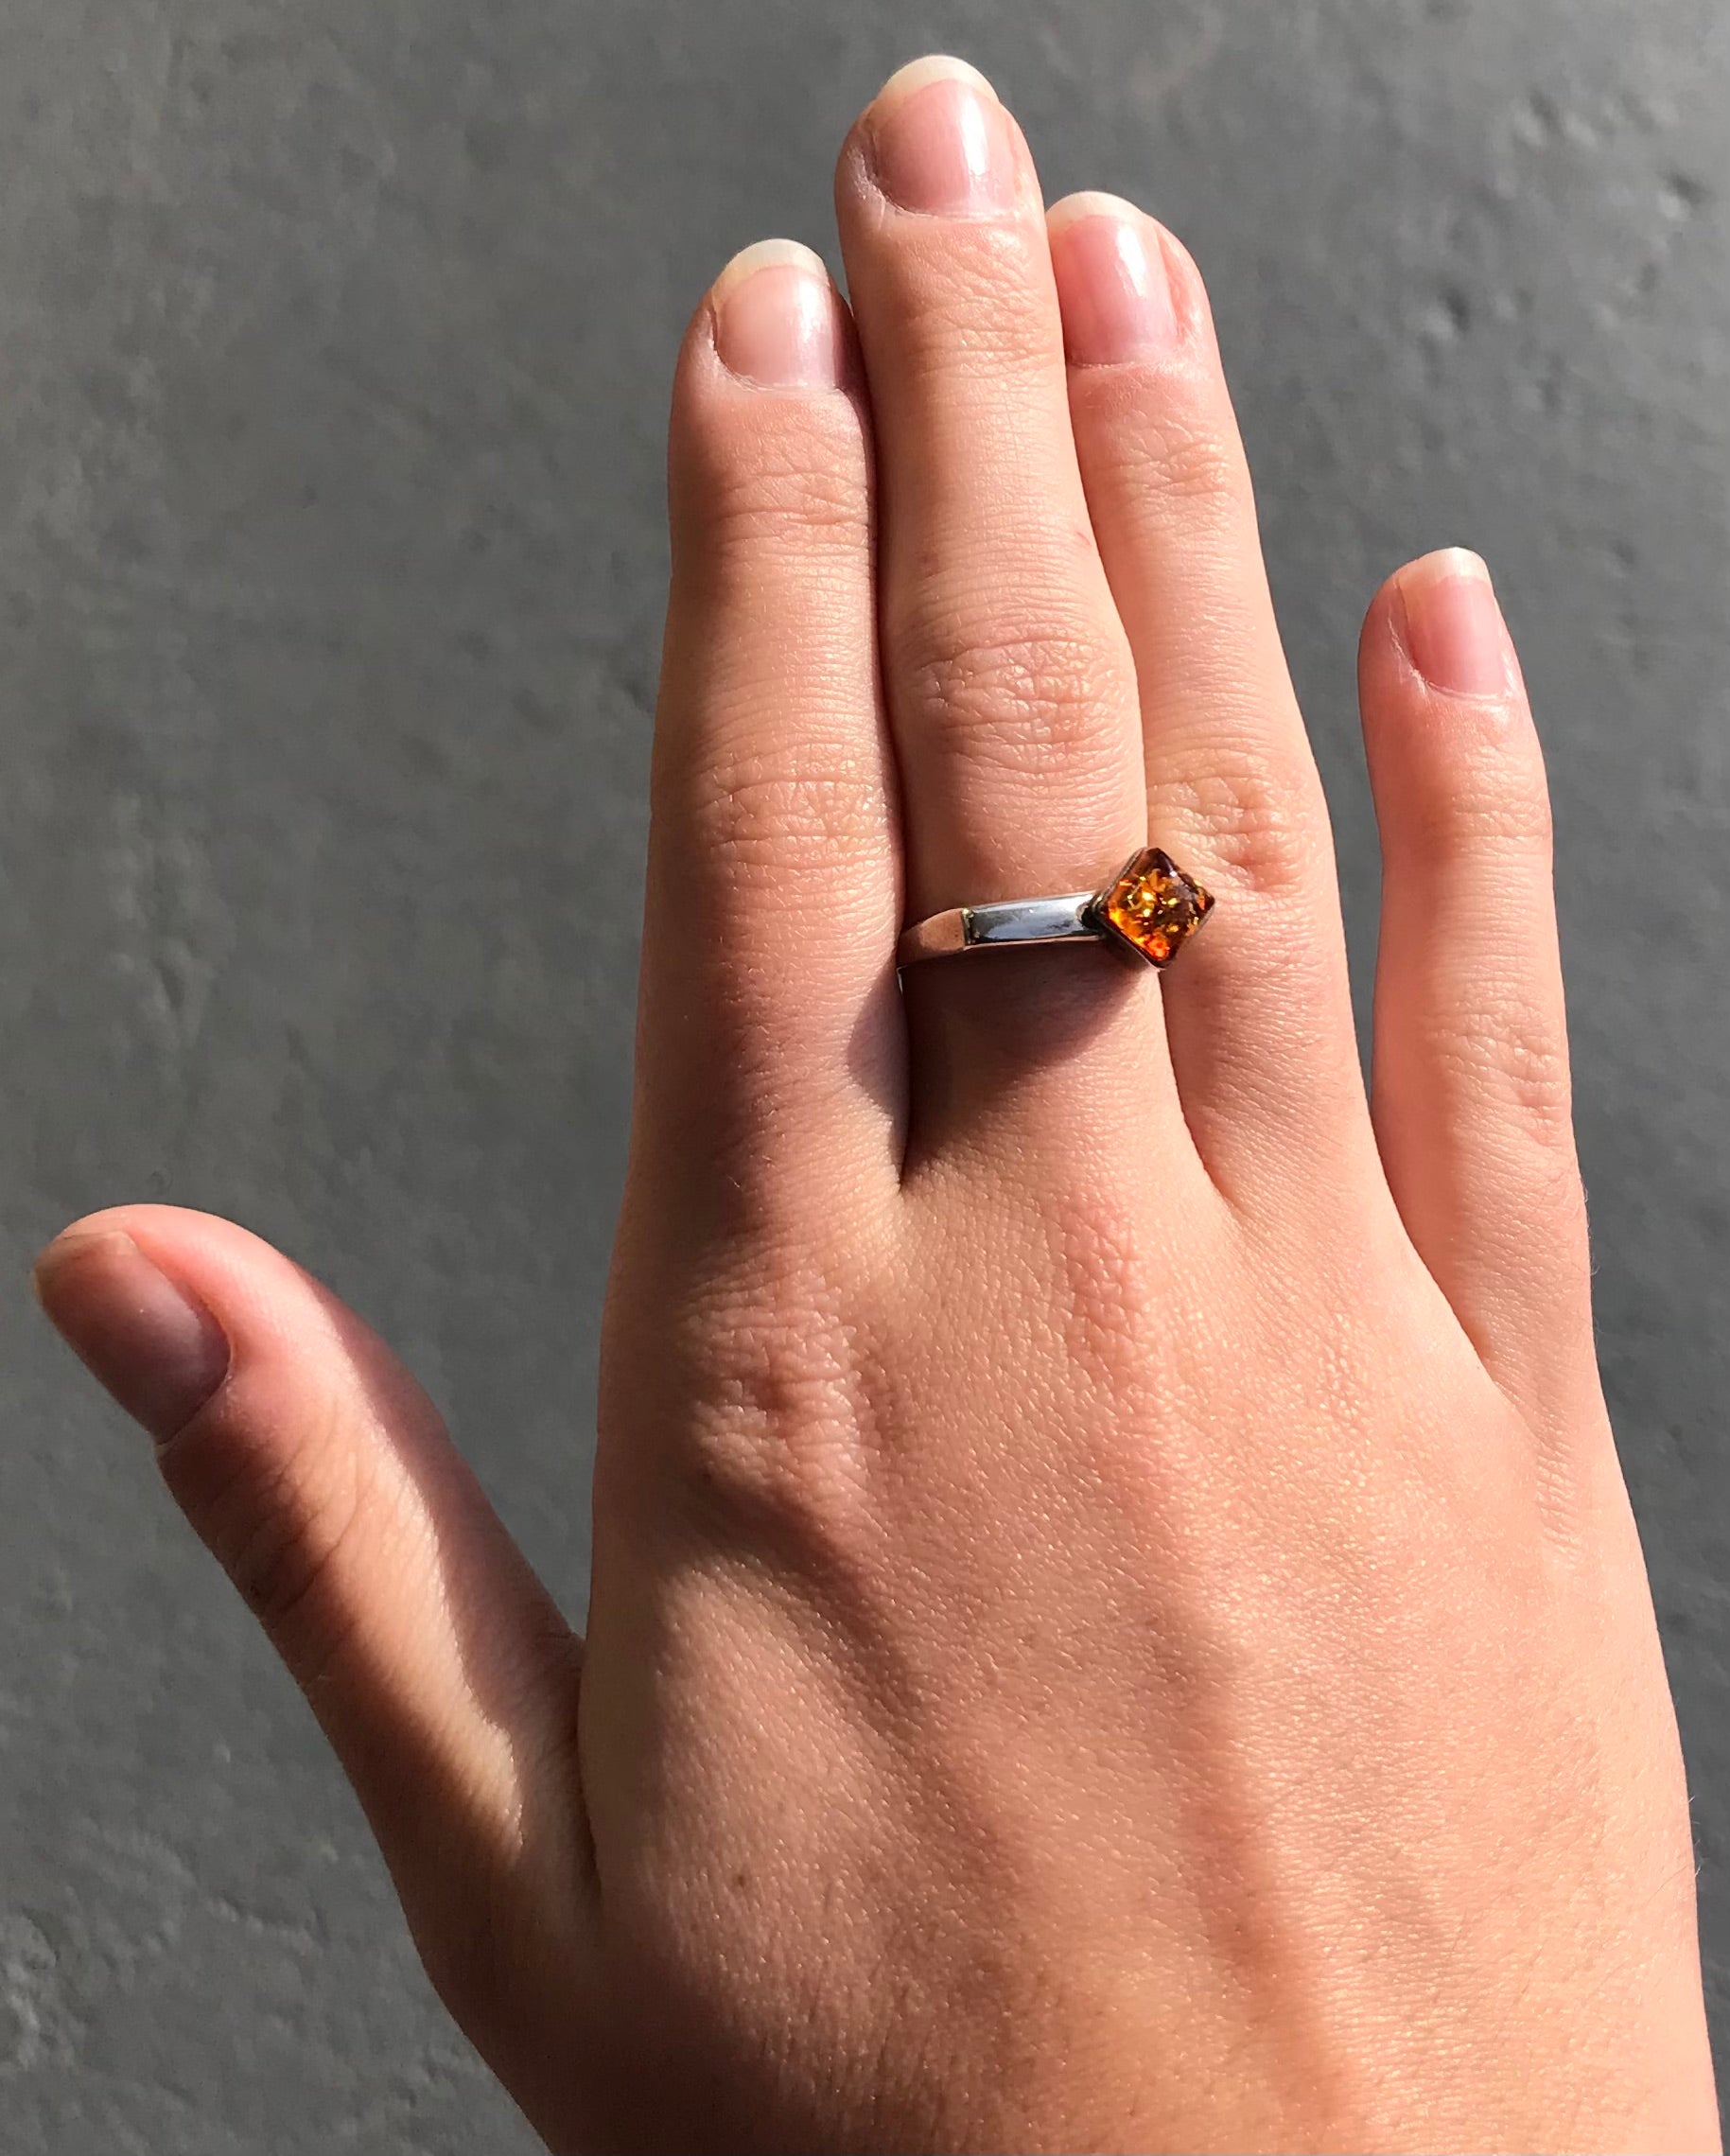 Square shaped Baltic Amber cabochon set in a unique sterling silver ring.